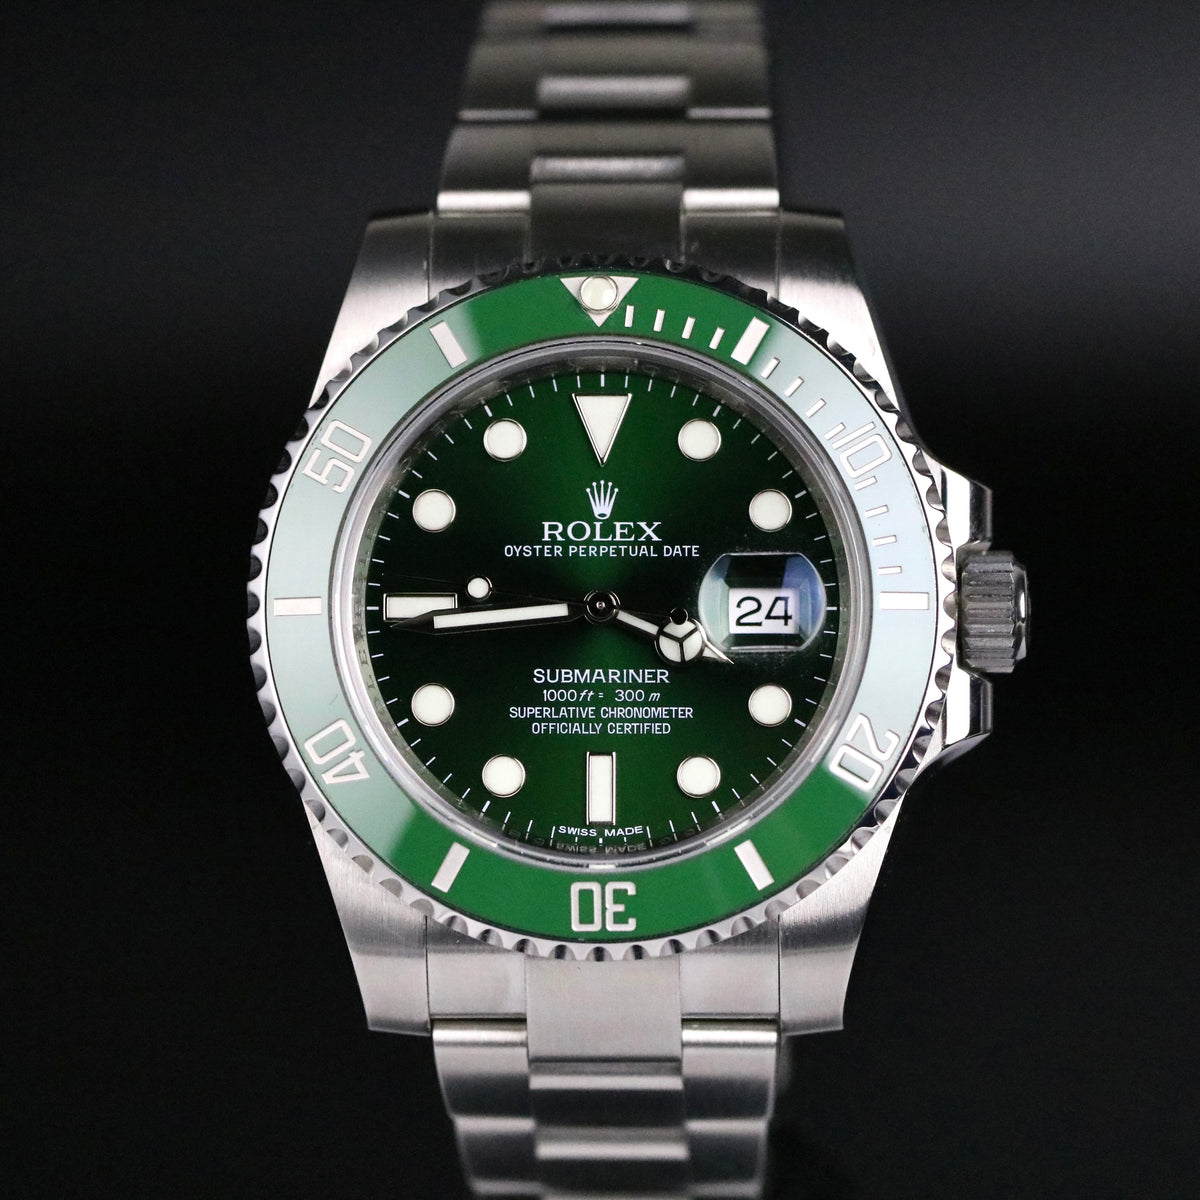 Unpolished 2015 Rolex 116610LV Green Submariner "HULK" with Box & Papers